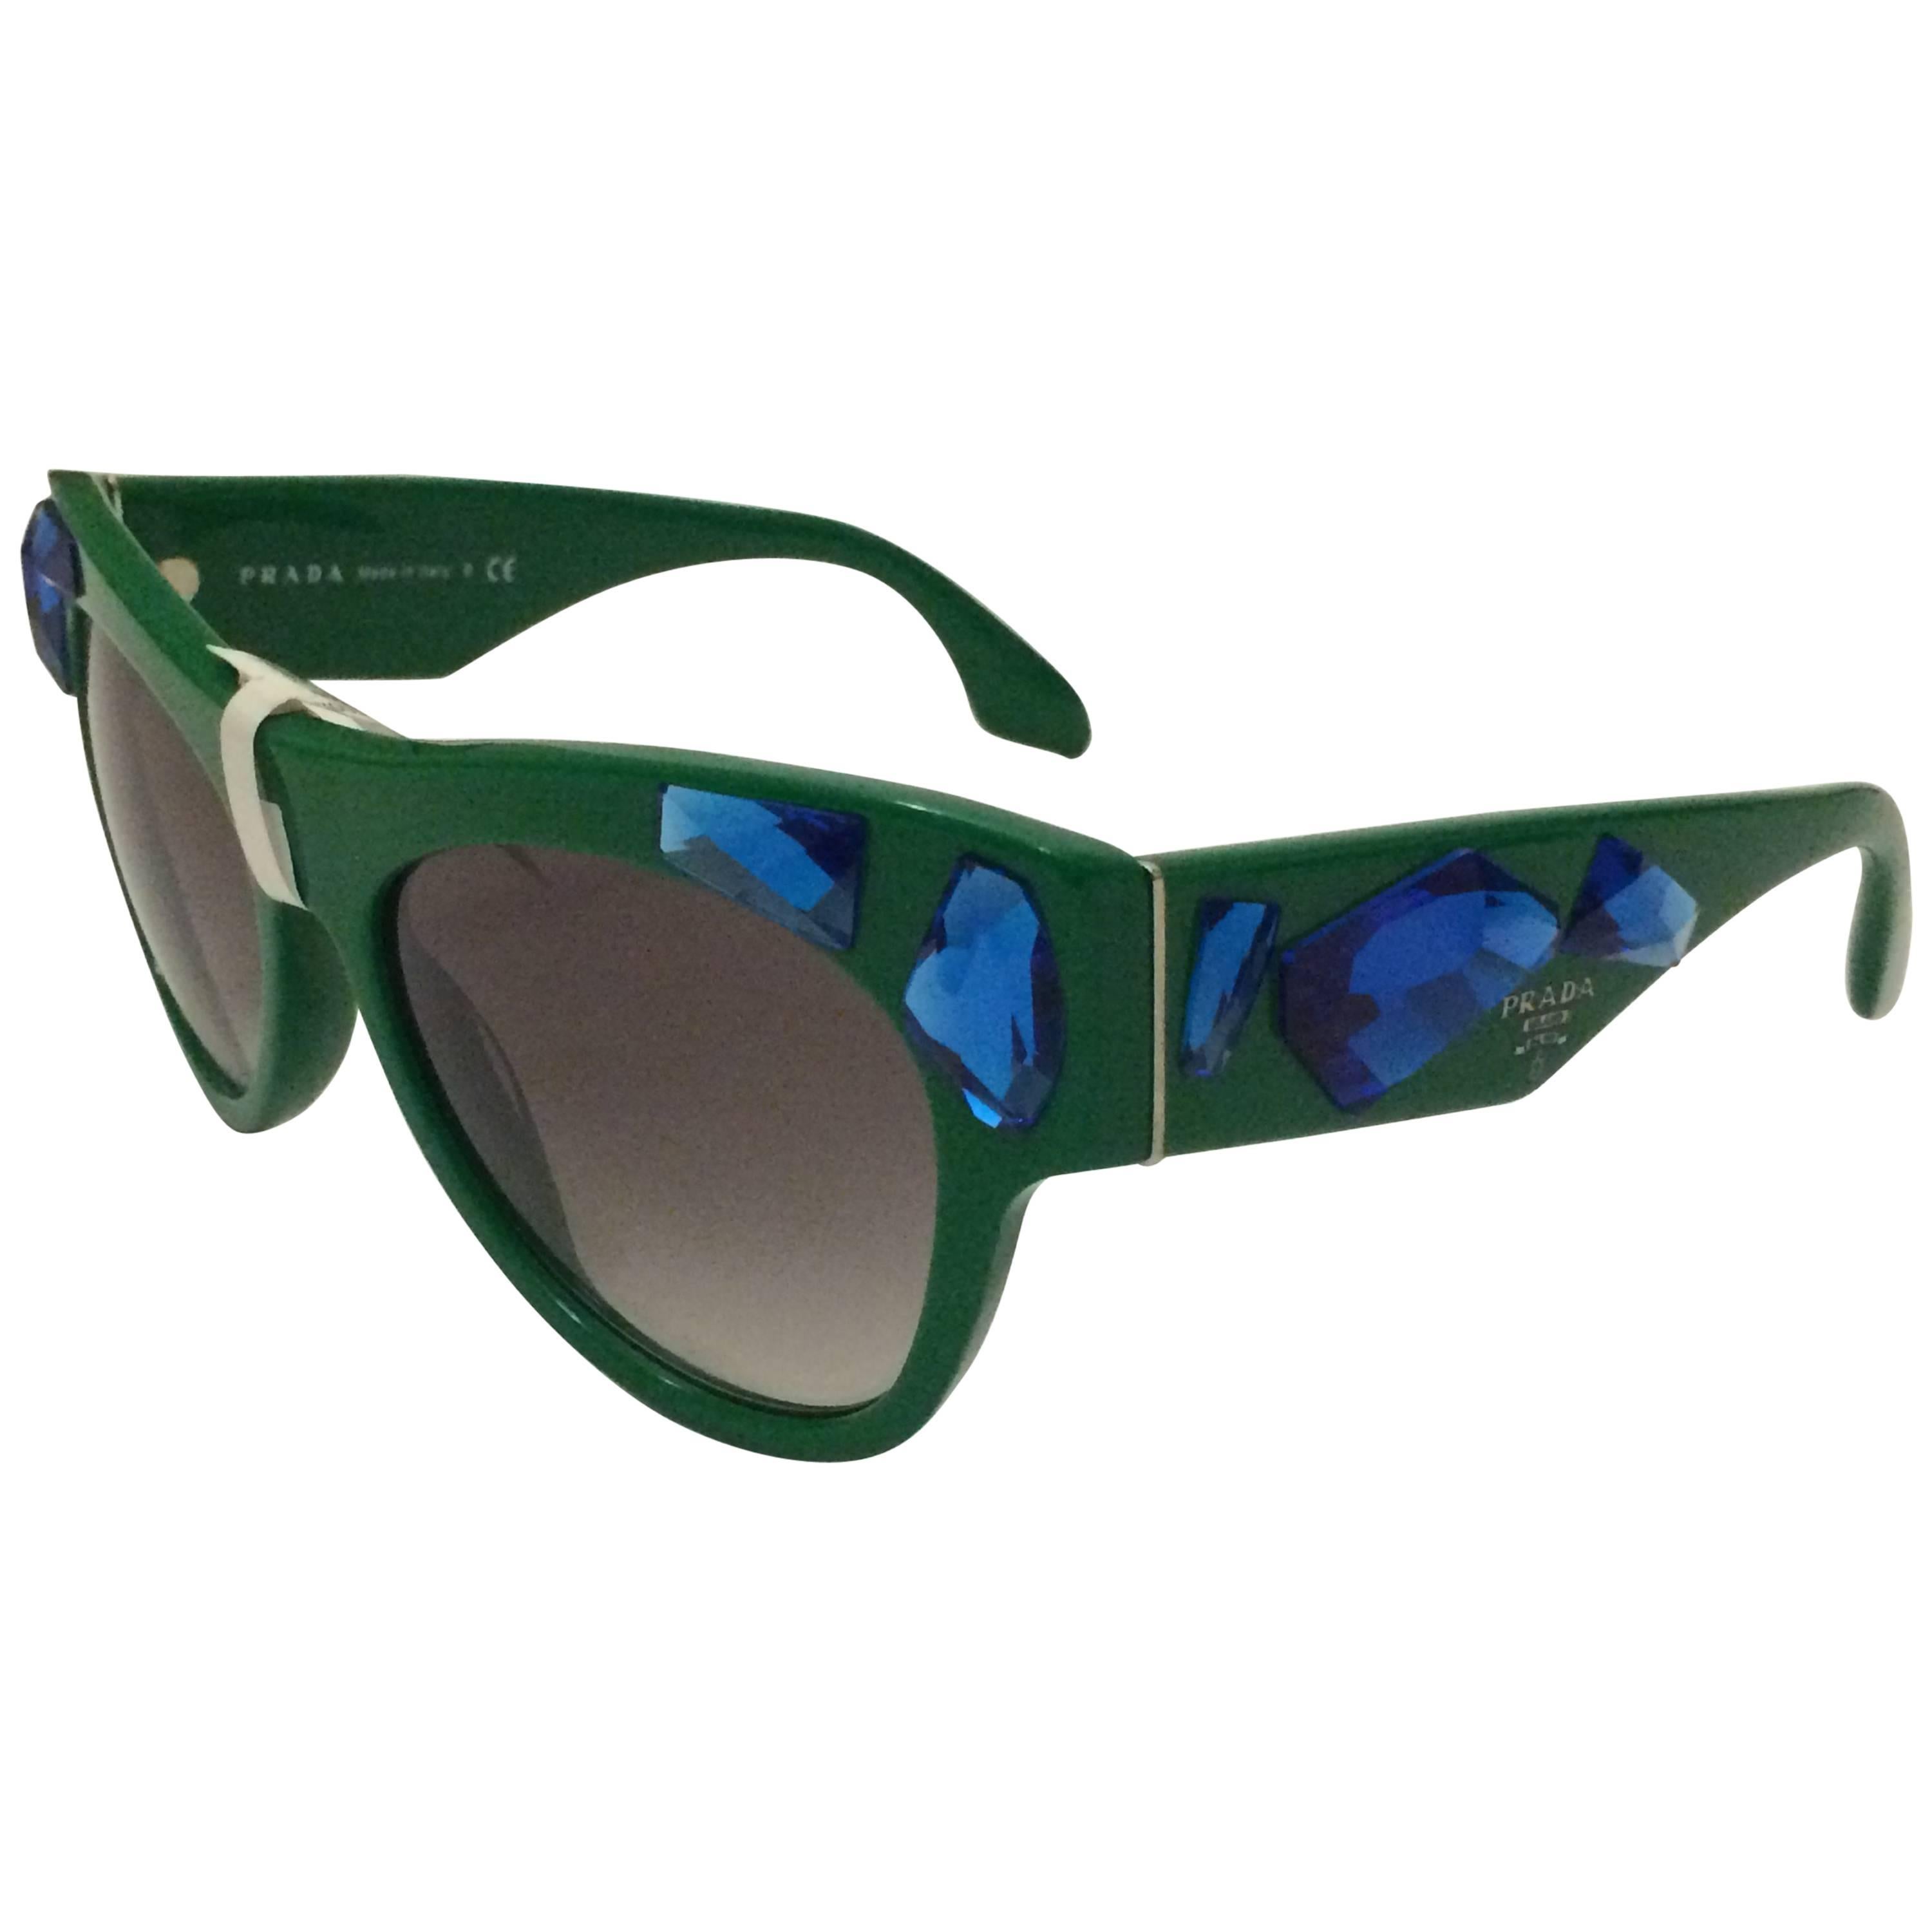 Prada Voice Sunglasses Green with Blue Crystal Embellishment New with Tags